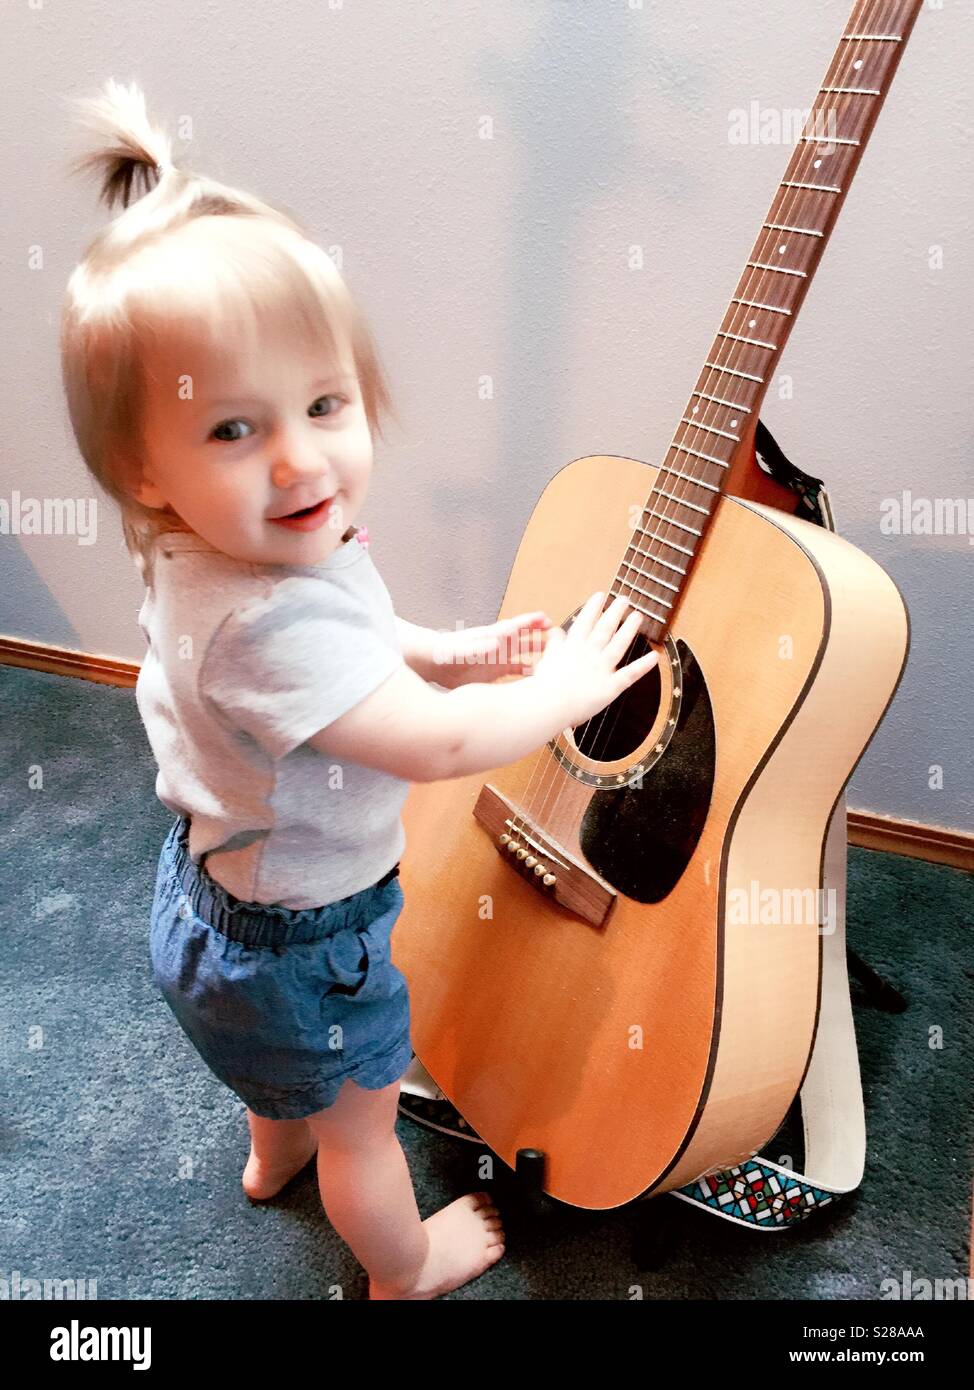 One and a half-year-old toddler reaching out to a acoustic guitar on a stand in her house, USA Stock Photo